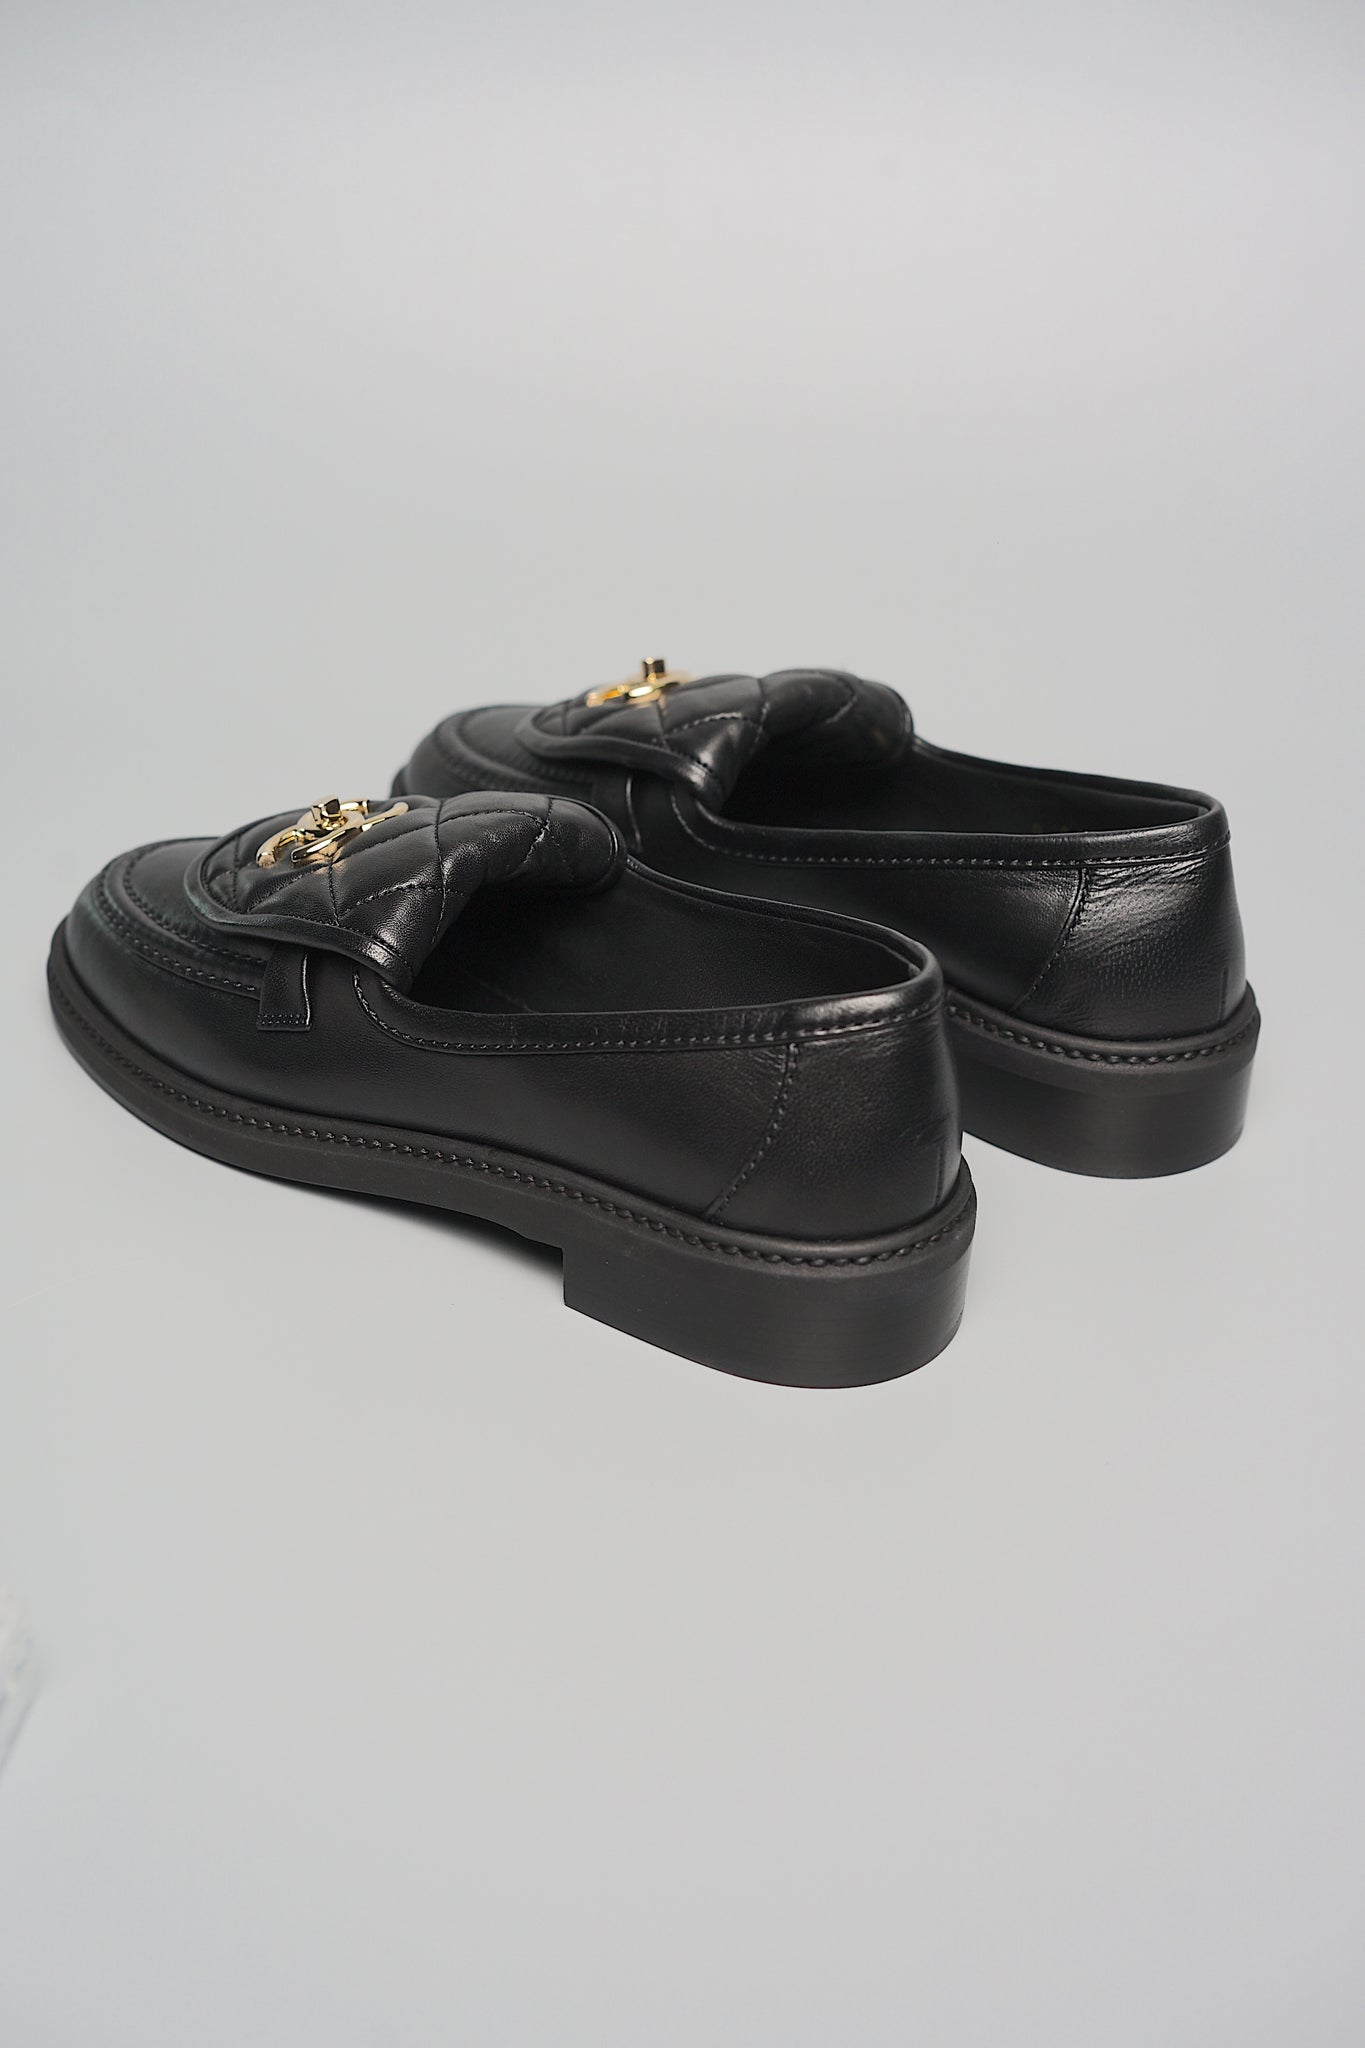 Chanel 24C Black Loafers in Size 37 (Brand New)